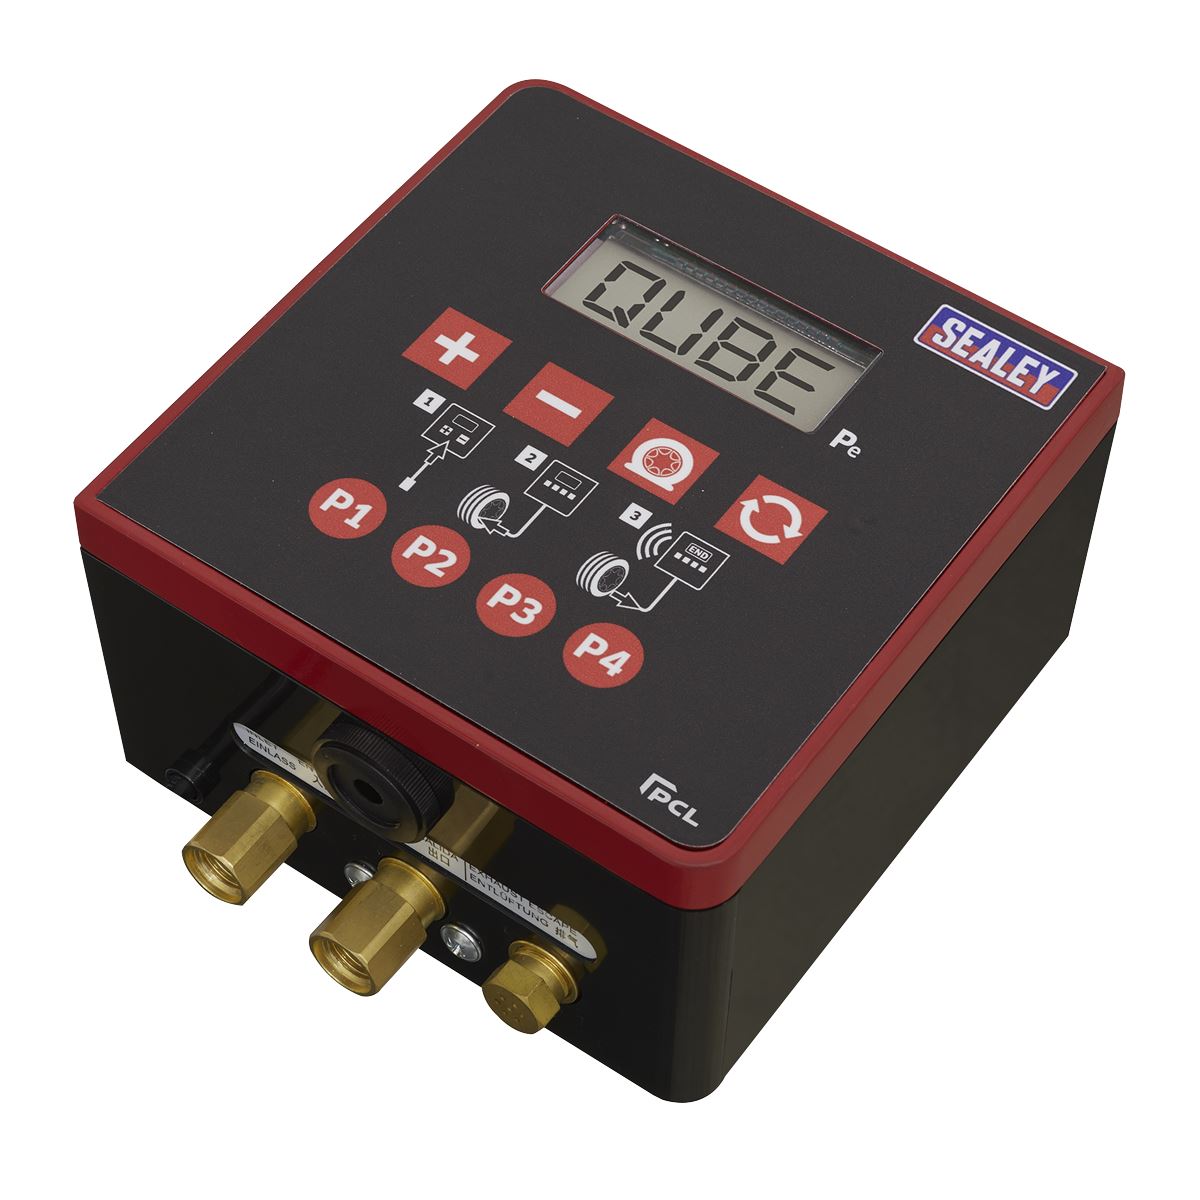 PCL Qube Digital Tyre Inflator Professional with OPS & Nitrogen Purge